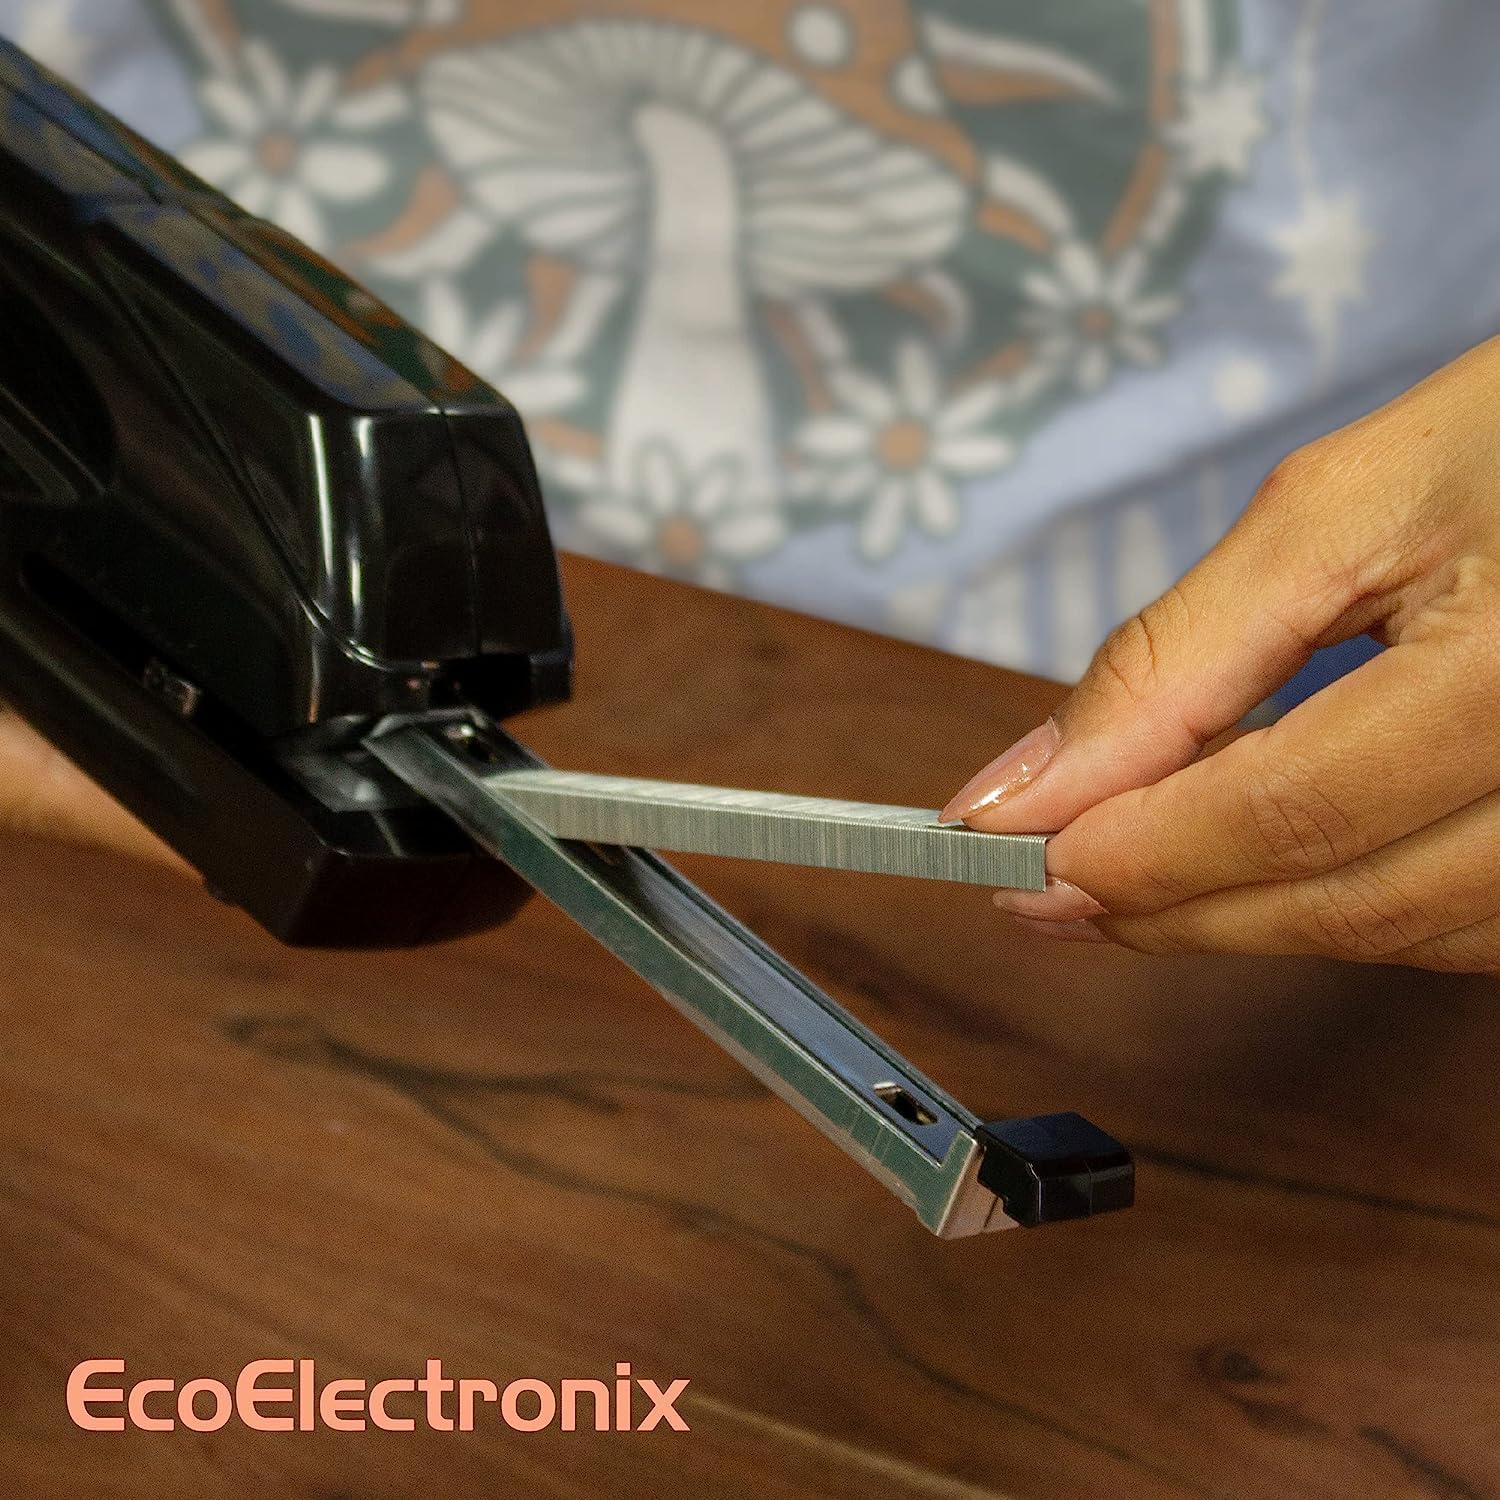 Eco Electronix Staples (10 Pack) and black StaplePro